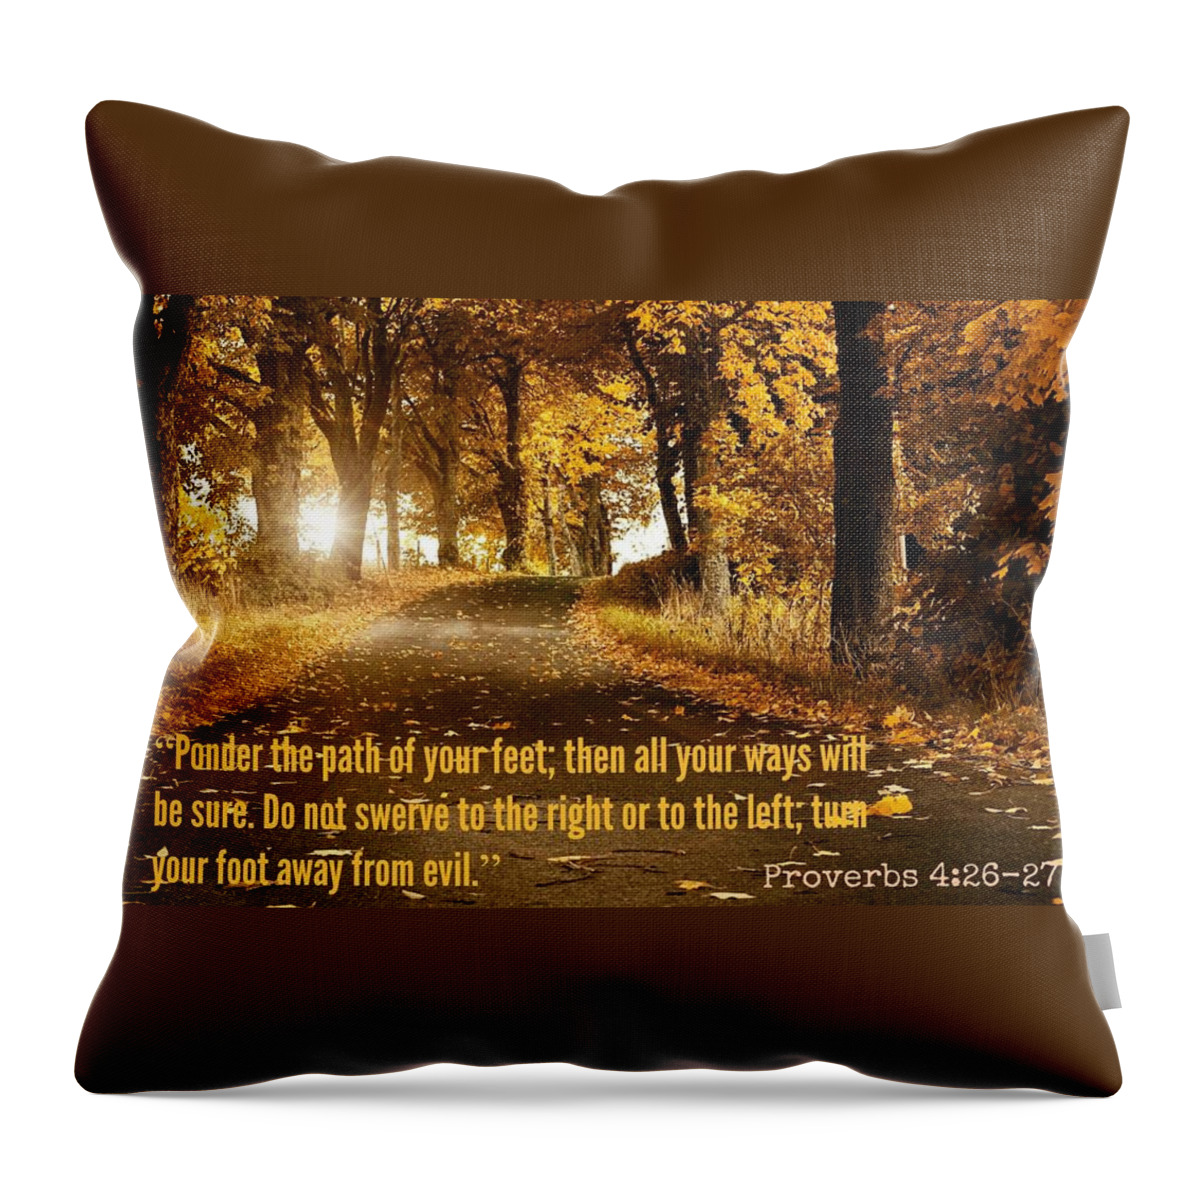  Throw Pillow featuring the photograph Proverbs104 by David Norman